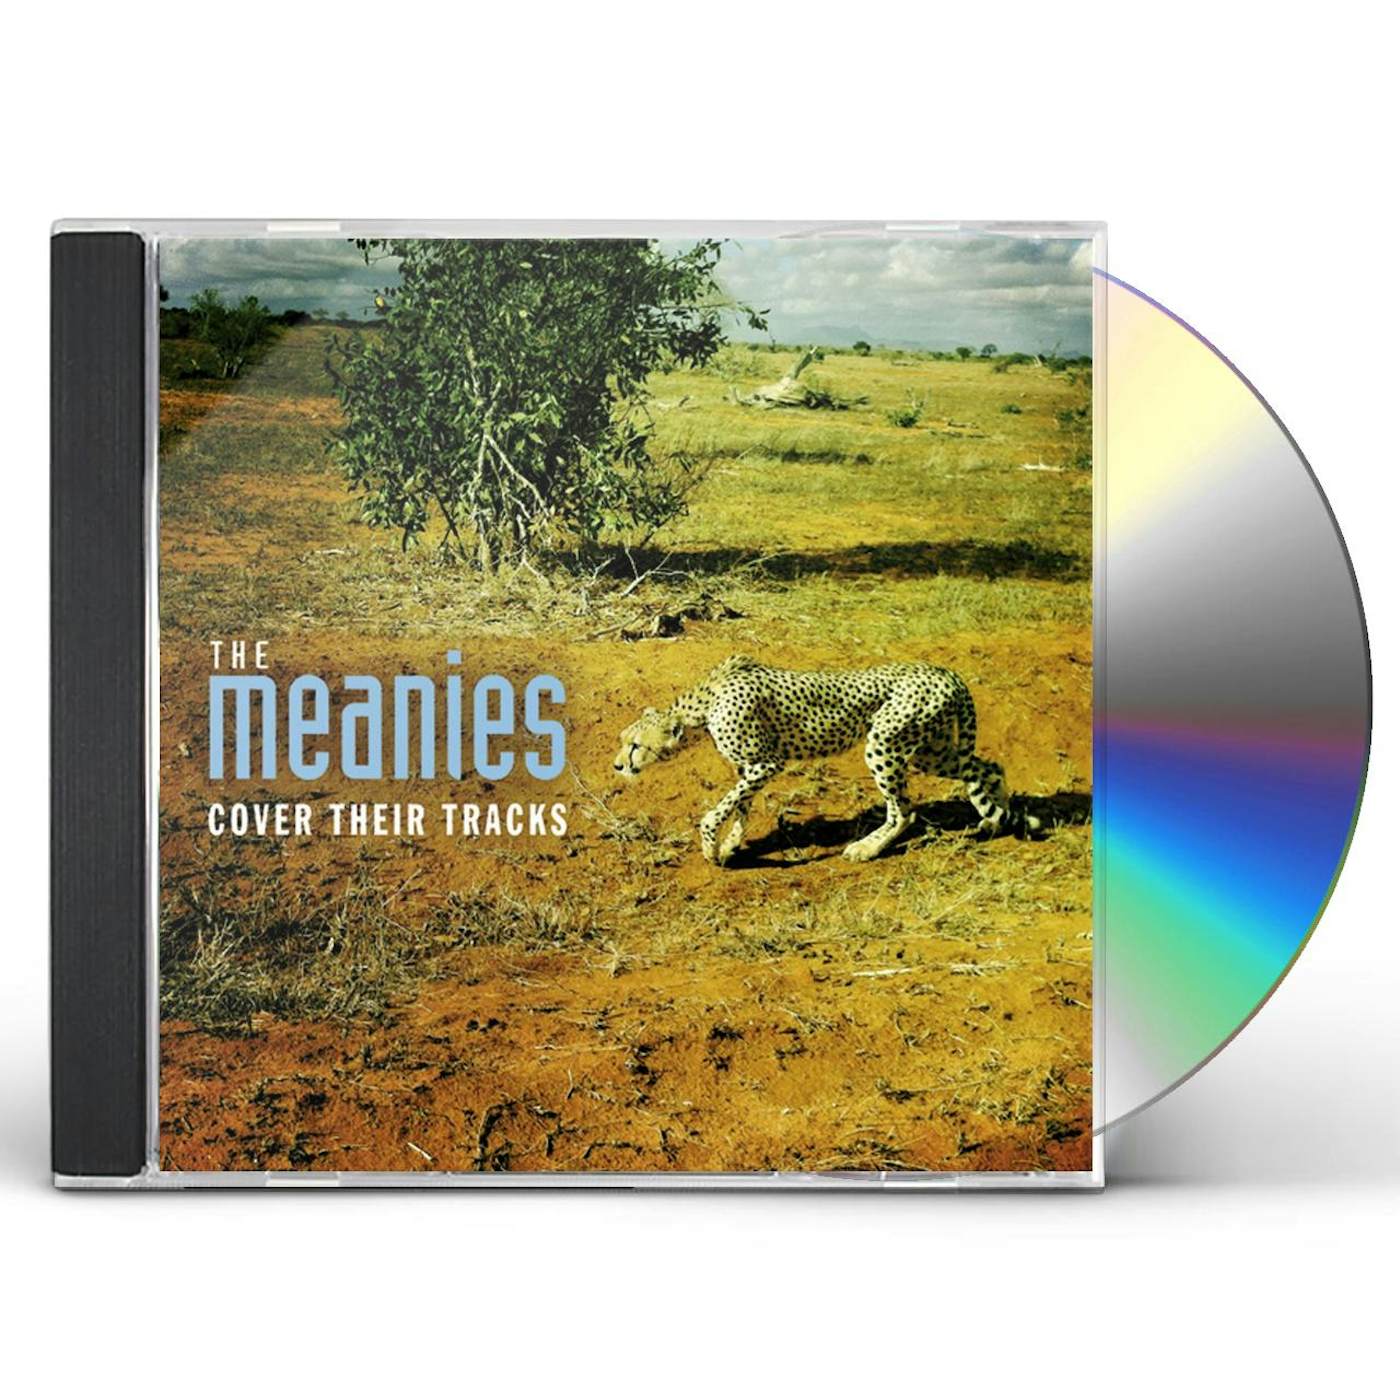 The Meanies COVER THEIR TRACKS CD